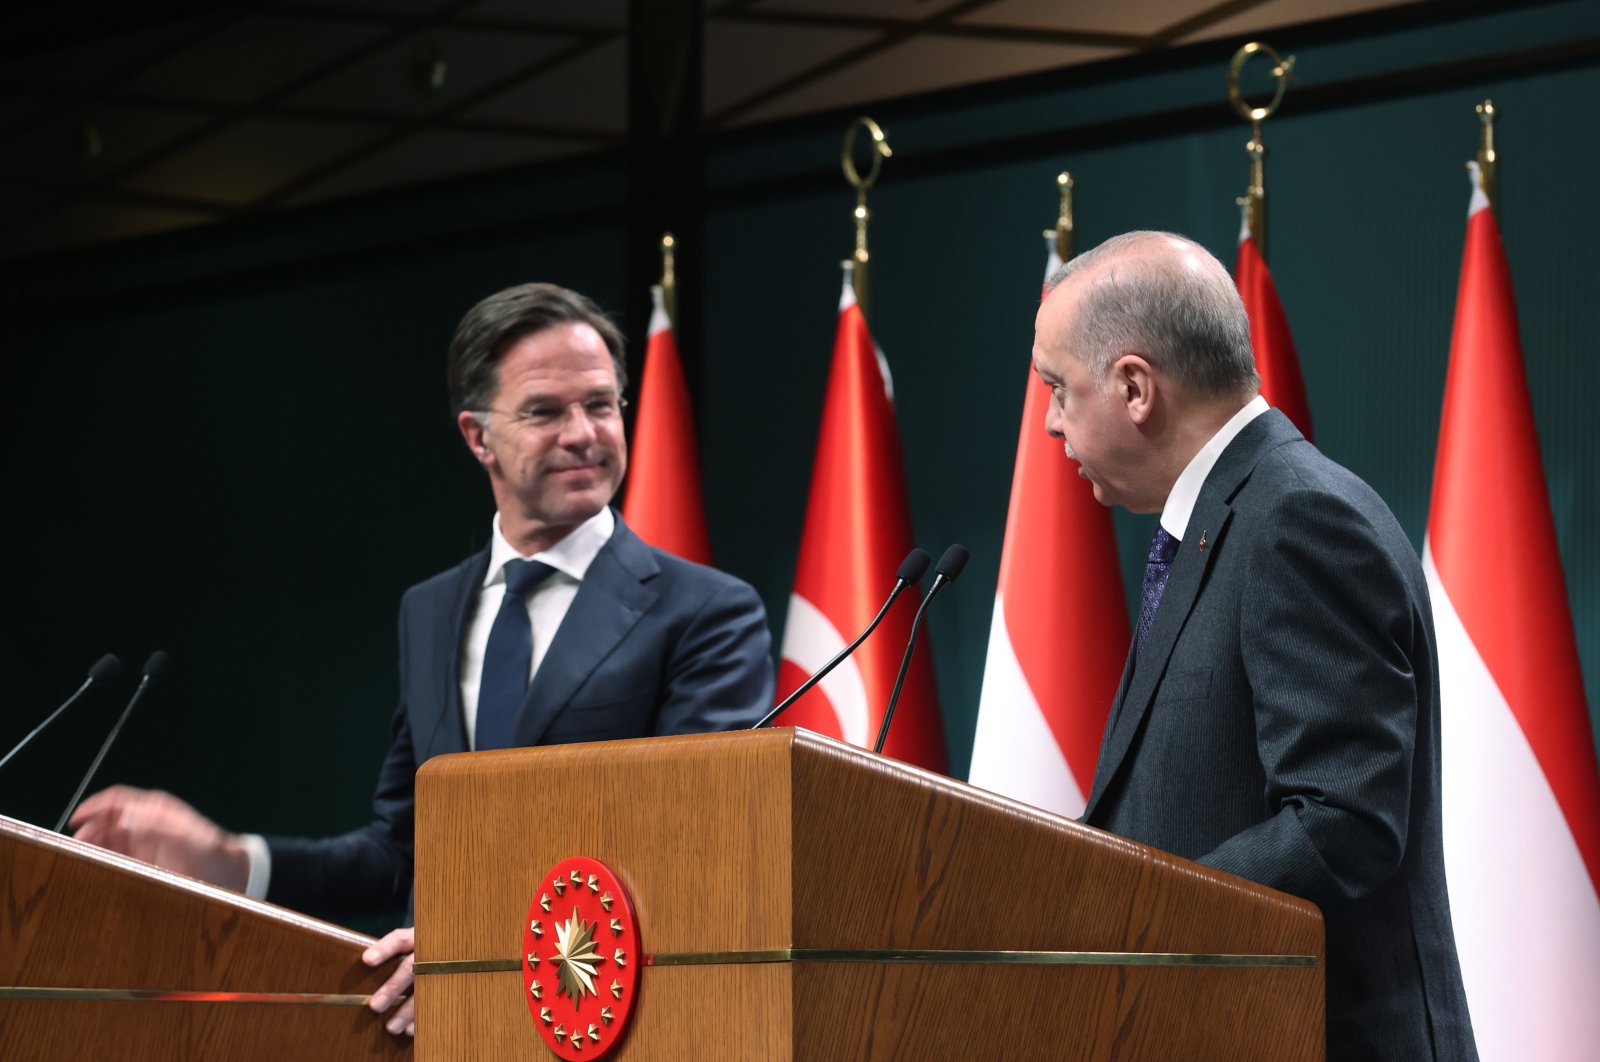 President Recep Tayyip Erdoğan and Dutch Prime Minister Mark Rutte attend a press conference after their meeting at the Presidential Palace in Ankara, Turkey, 22 March 2022. (EPA Photo)